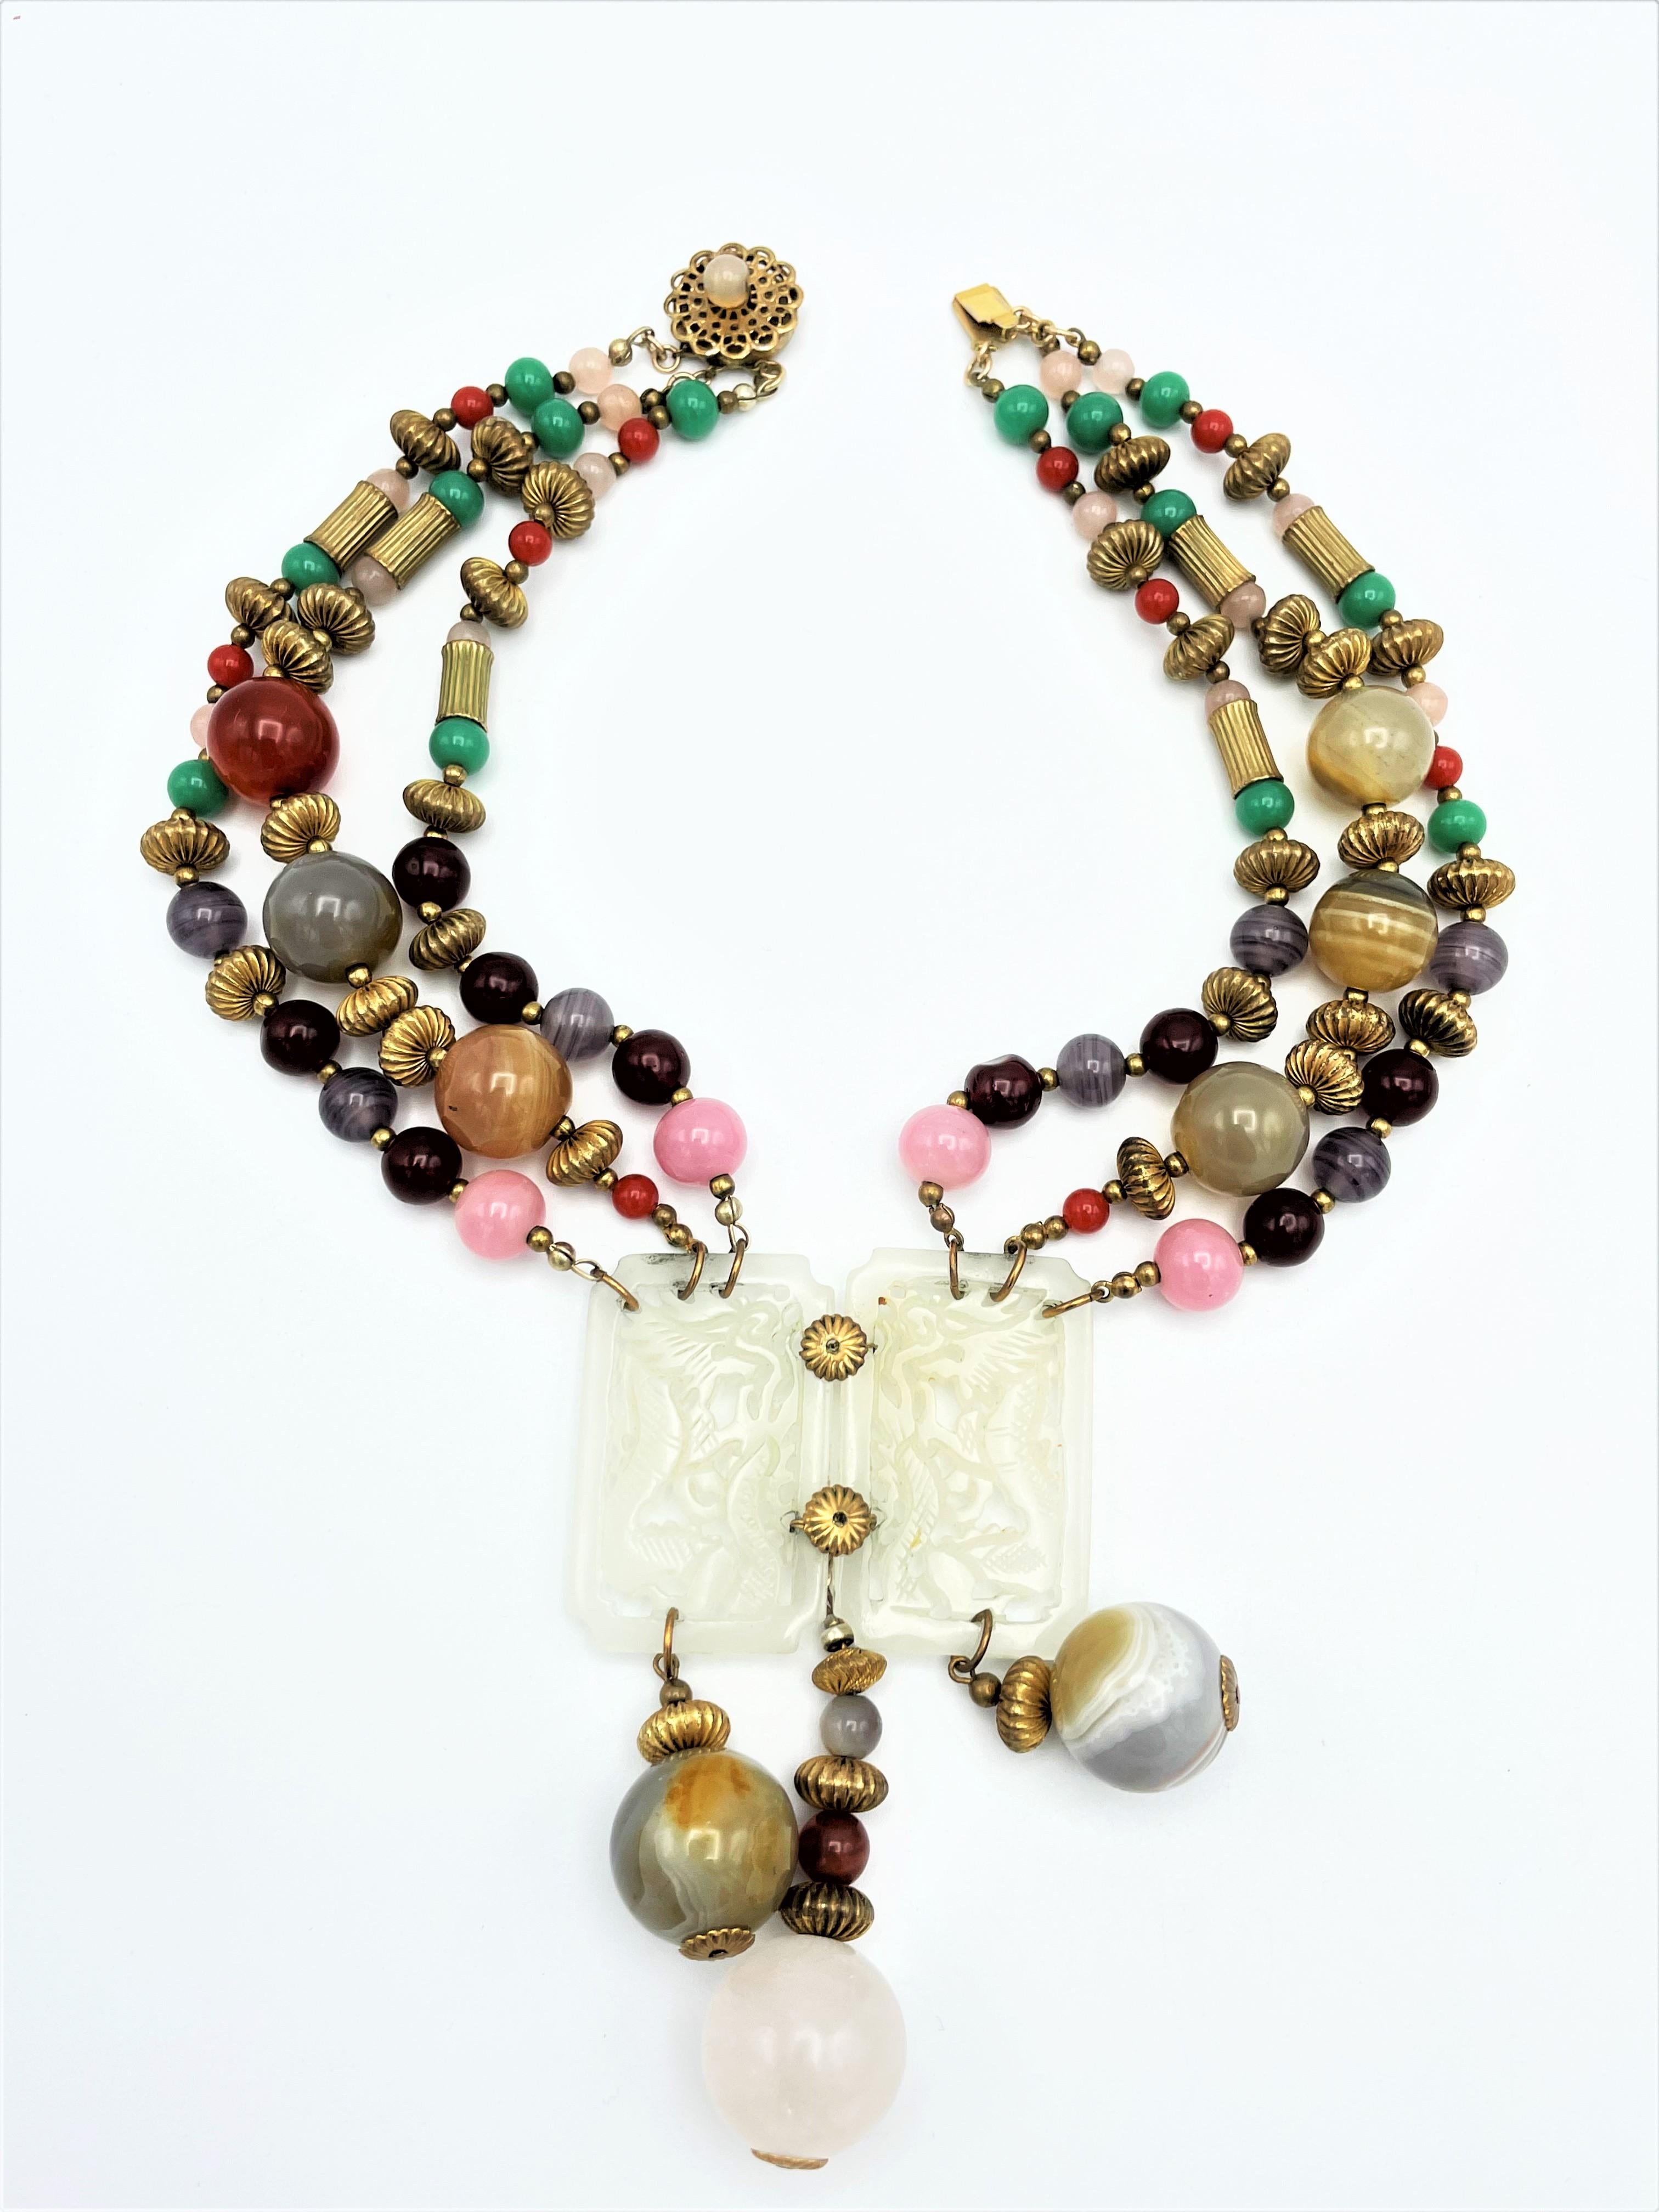 Women's Vintage Miriam Haskell necklace, agate and glass beads, jade similar  1950s USA For Sale